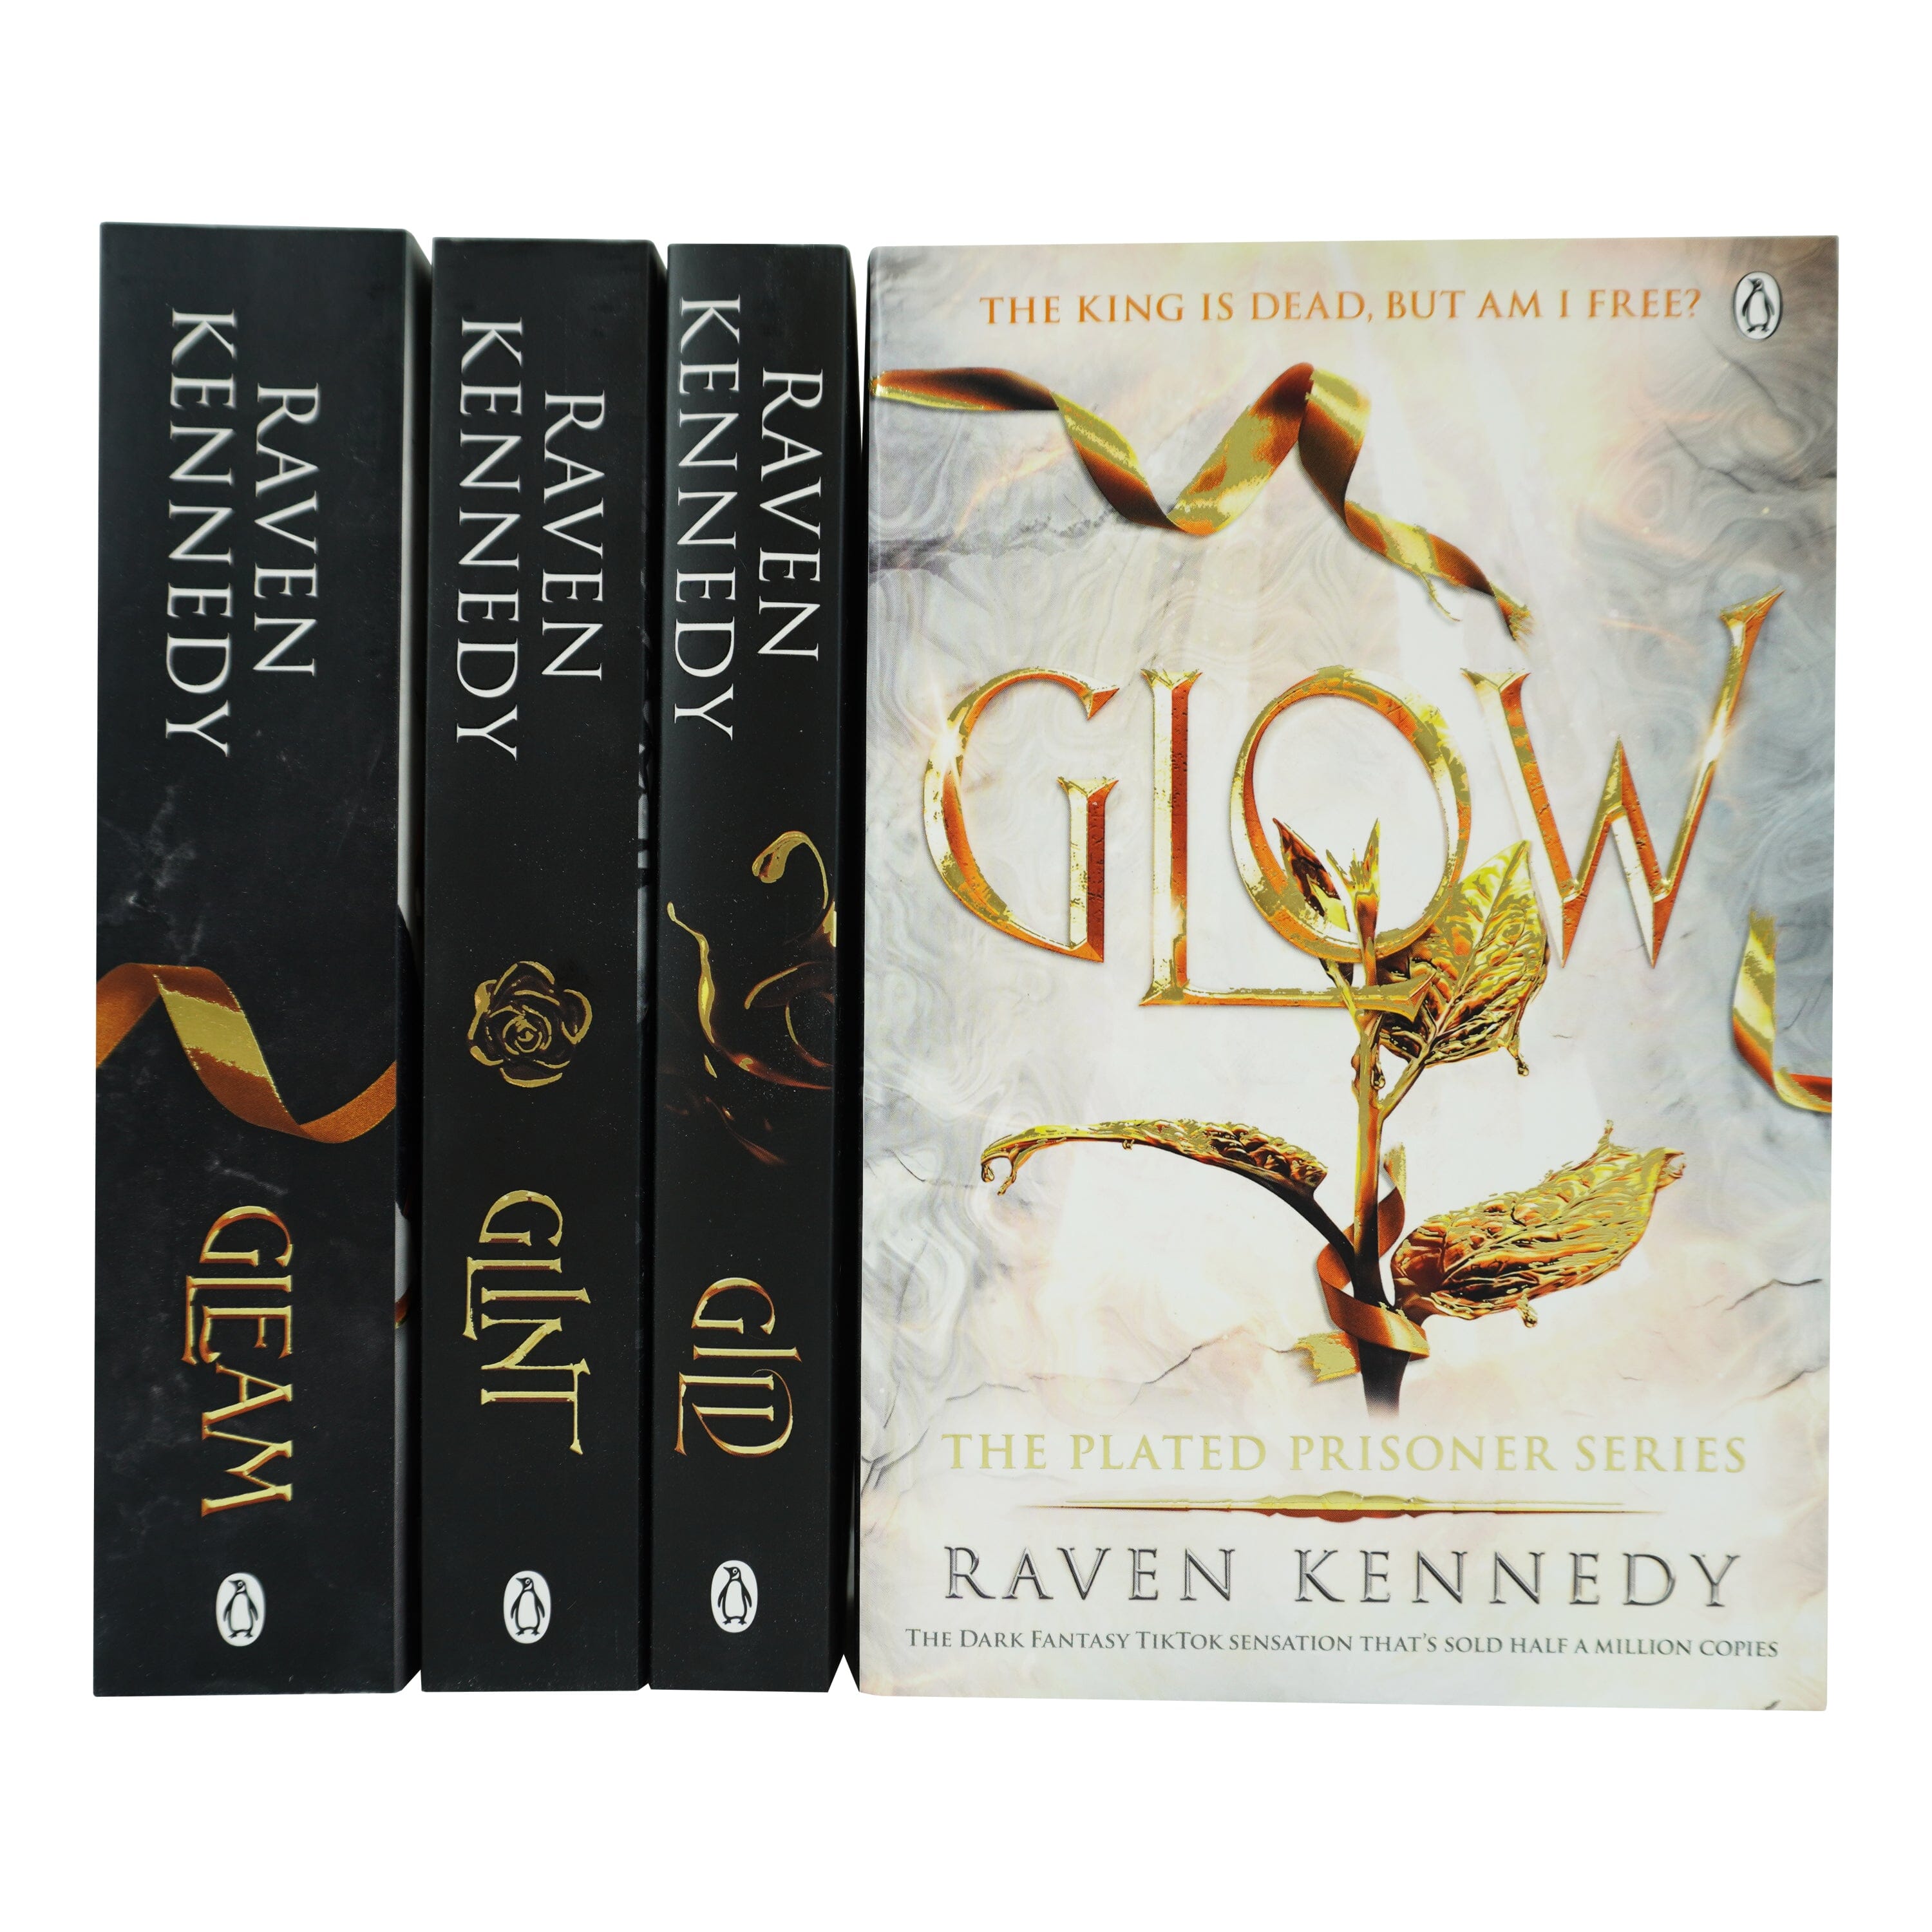 Raven　Books　By　Kennedy　F　—　Set　The　Books2Door　Series　Plated　Prisoner　Collection